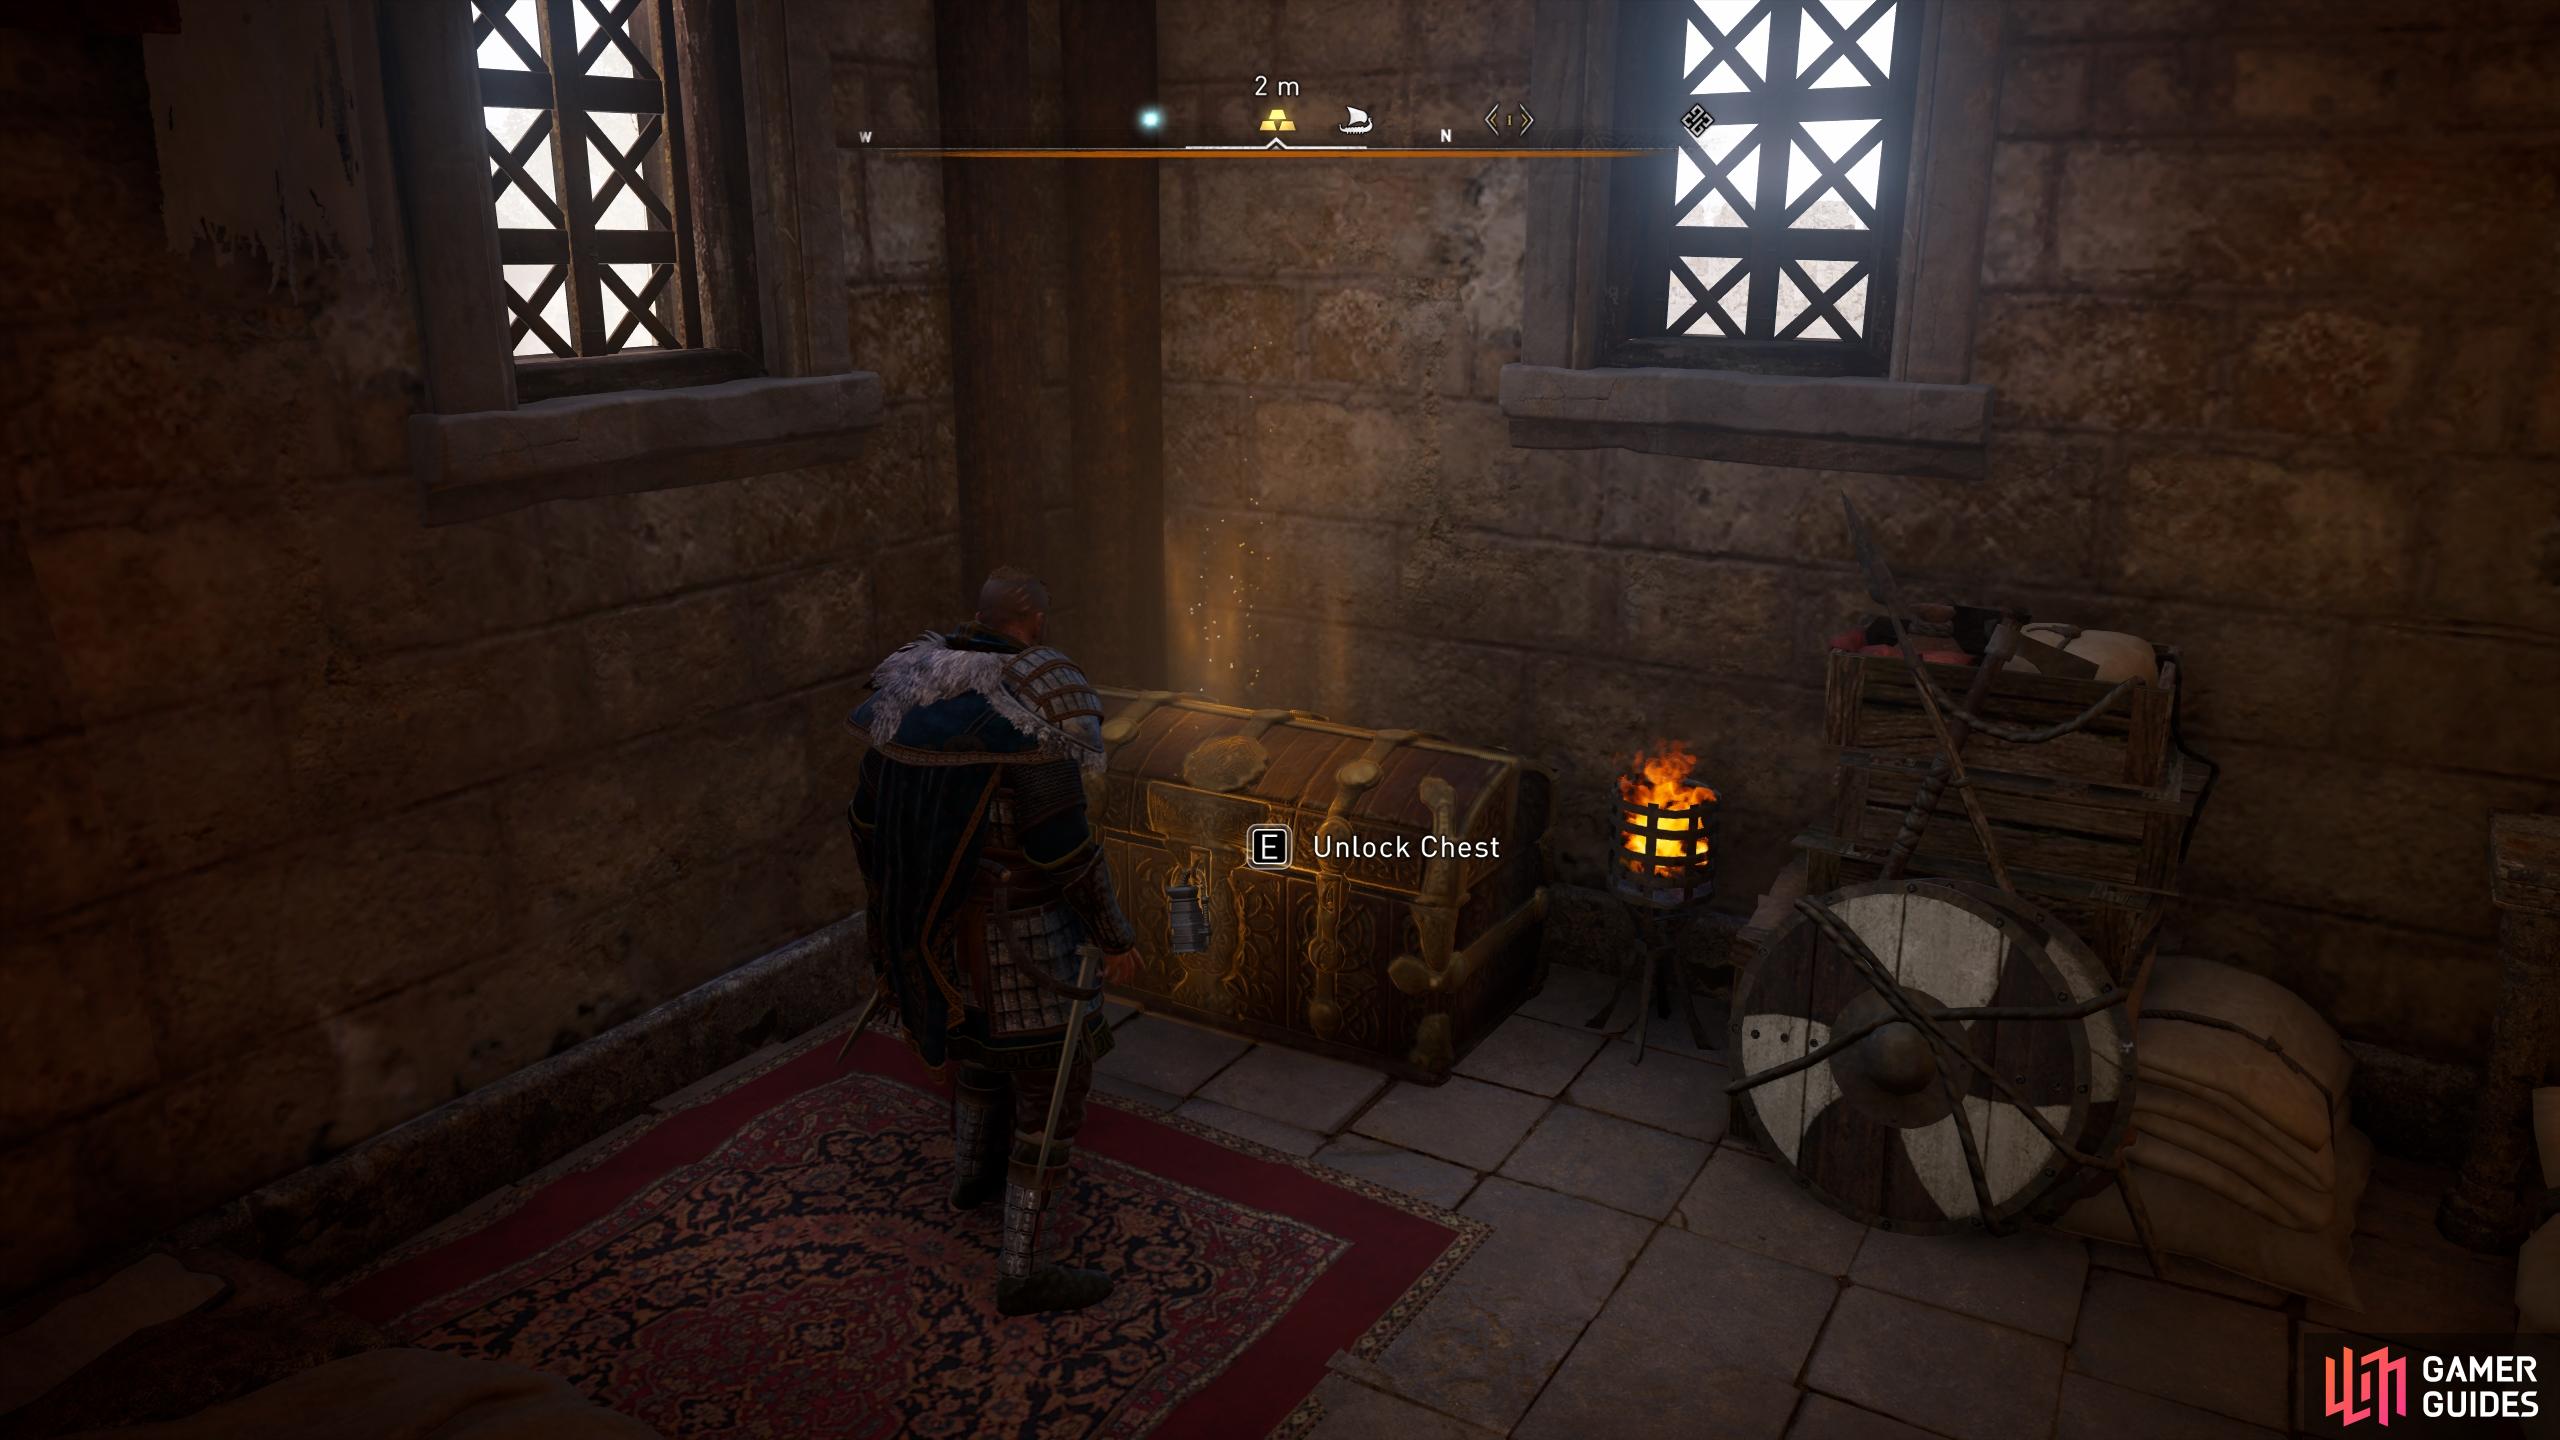 You'll need to loot a key from the Gedriht in the main church to open the chest.